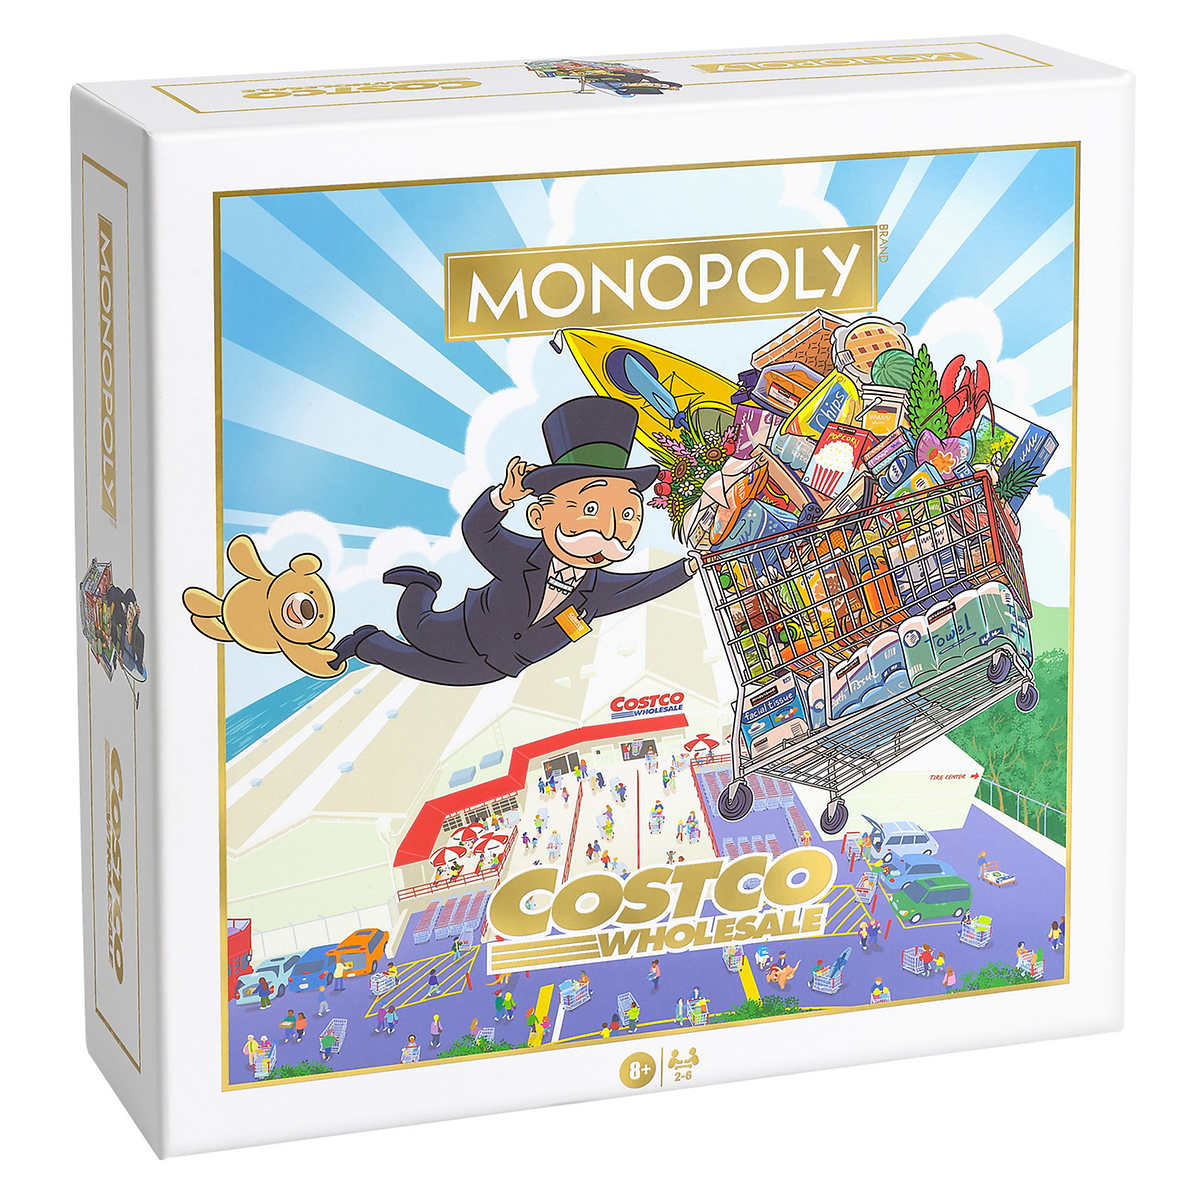 Costco Members: Costco Wholesale Monopoly Oversized Game Board (22"x22") $14.99 + Free Shipping